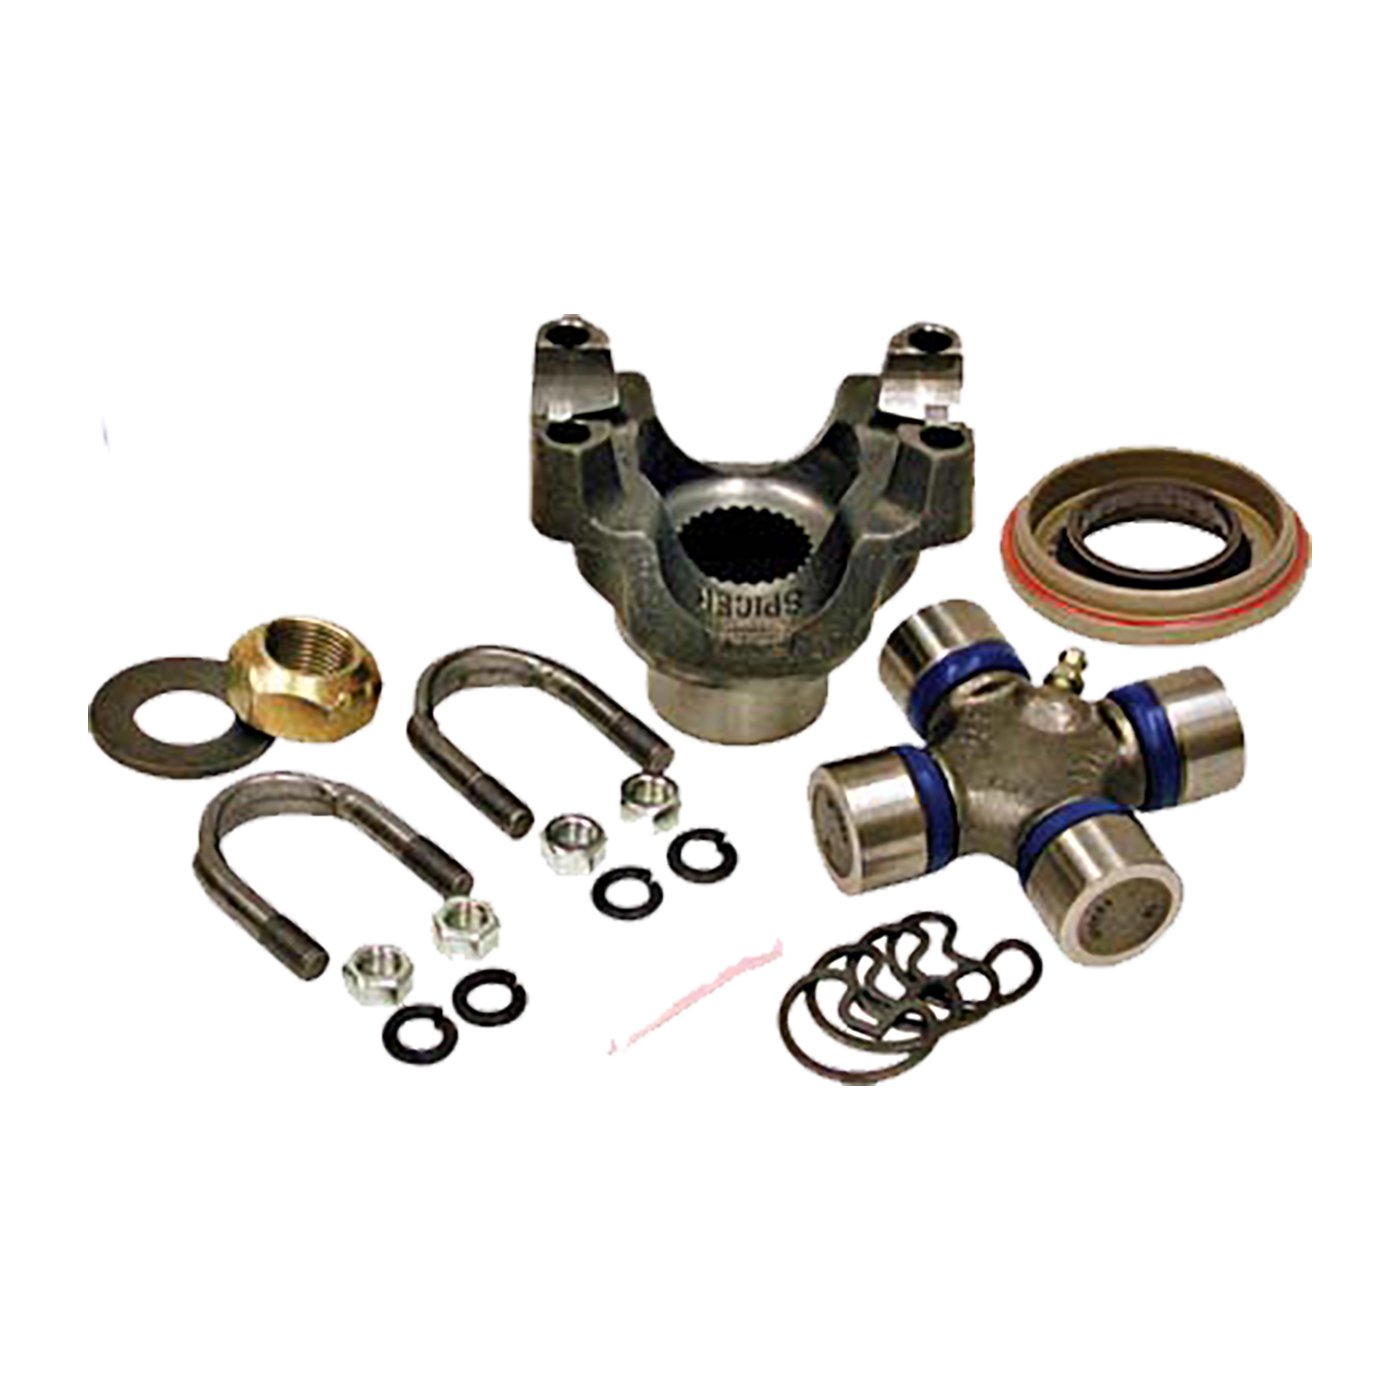 Replacement Trail Repair Kit For Amc Model 20 W/1310 U-Joint And U-Bolts